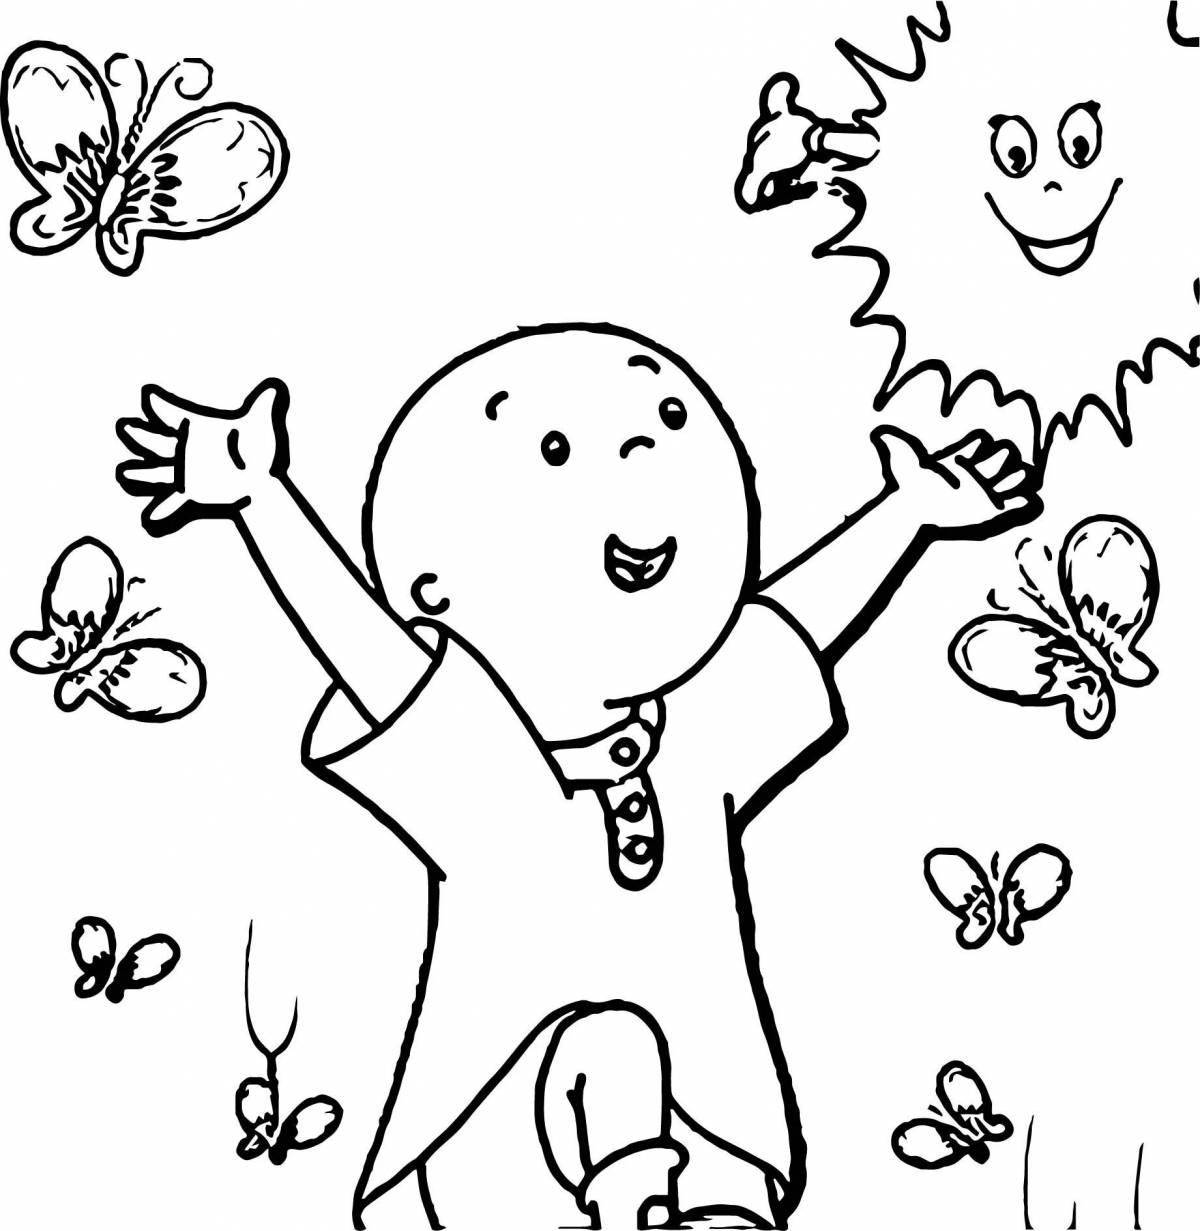 Colorful joy coloring page